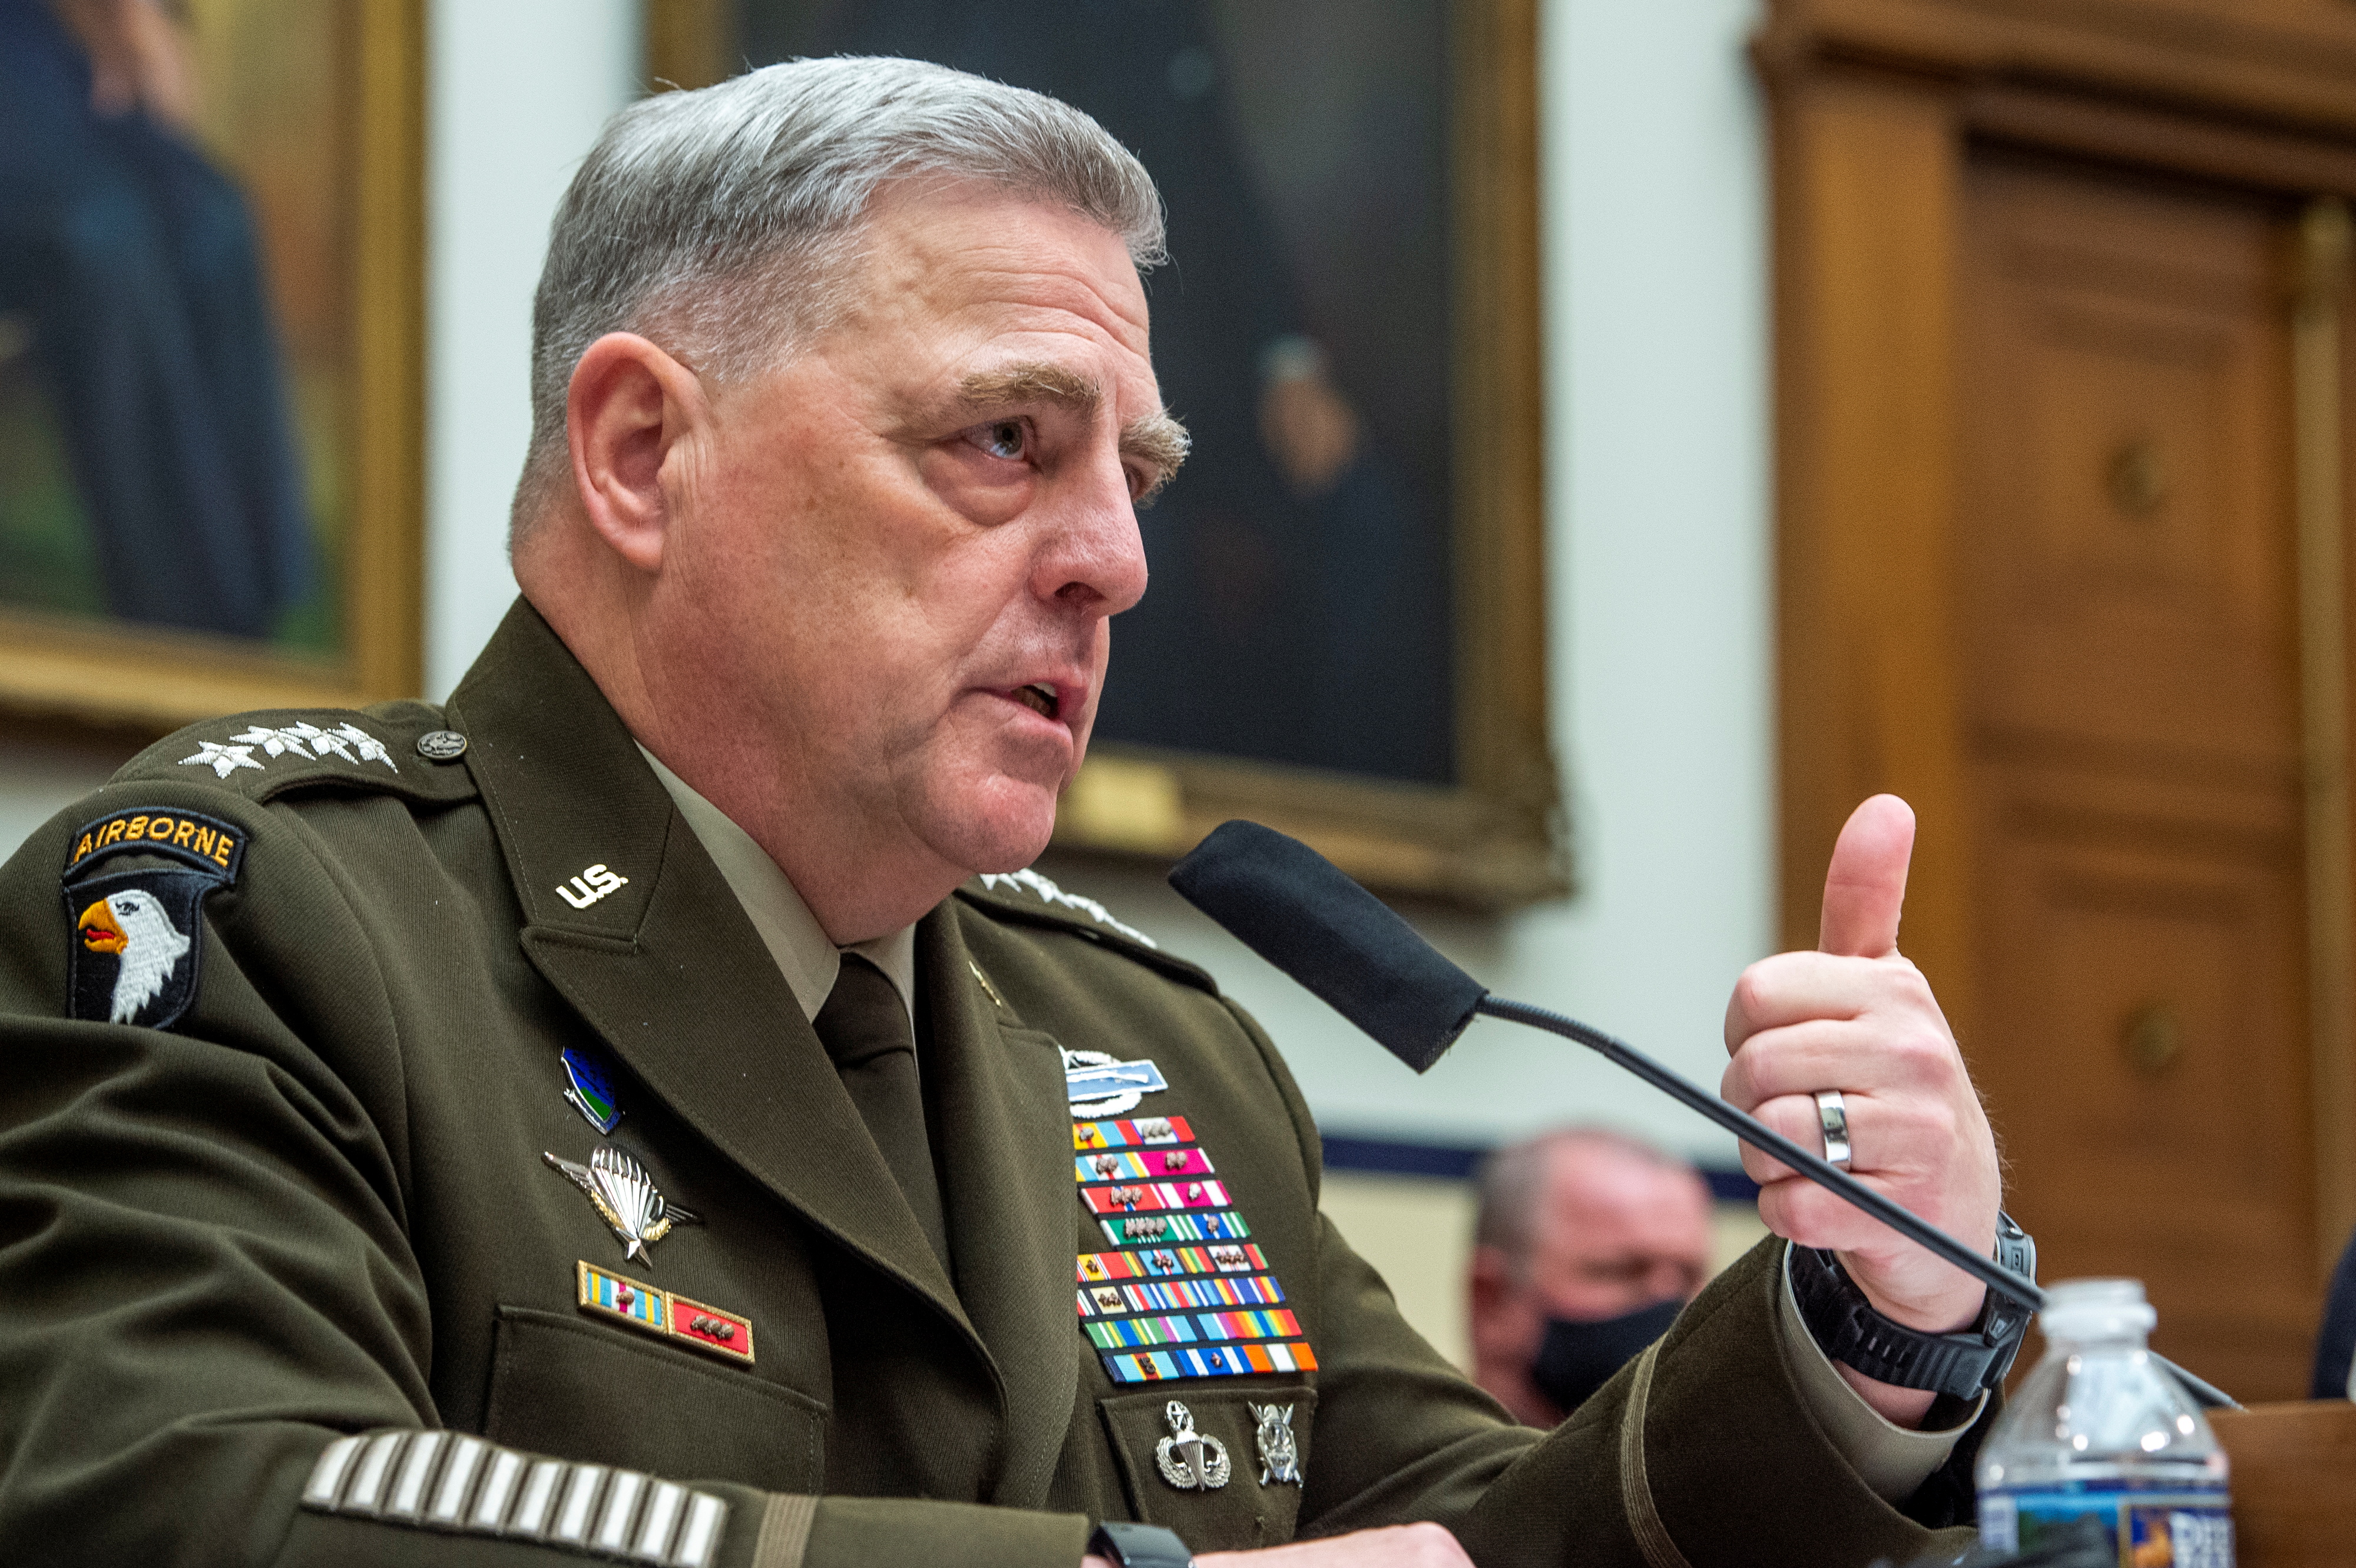 Chairman of the Joint Chiefs of Staff, U.S. Army General Mark A. Milley, responds to questions during a House Armed Services Committee hearing on 